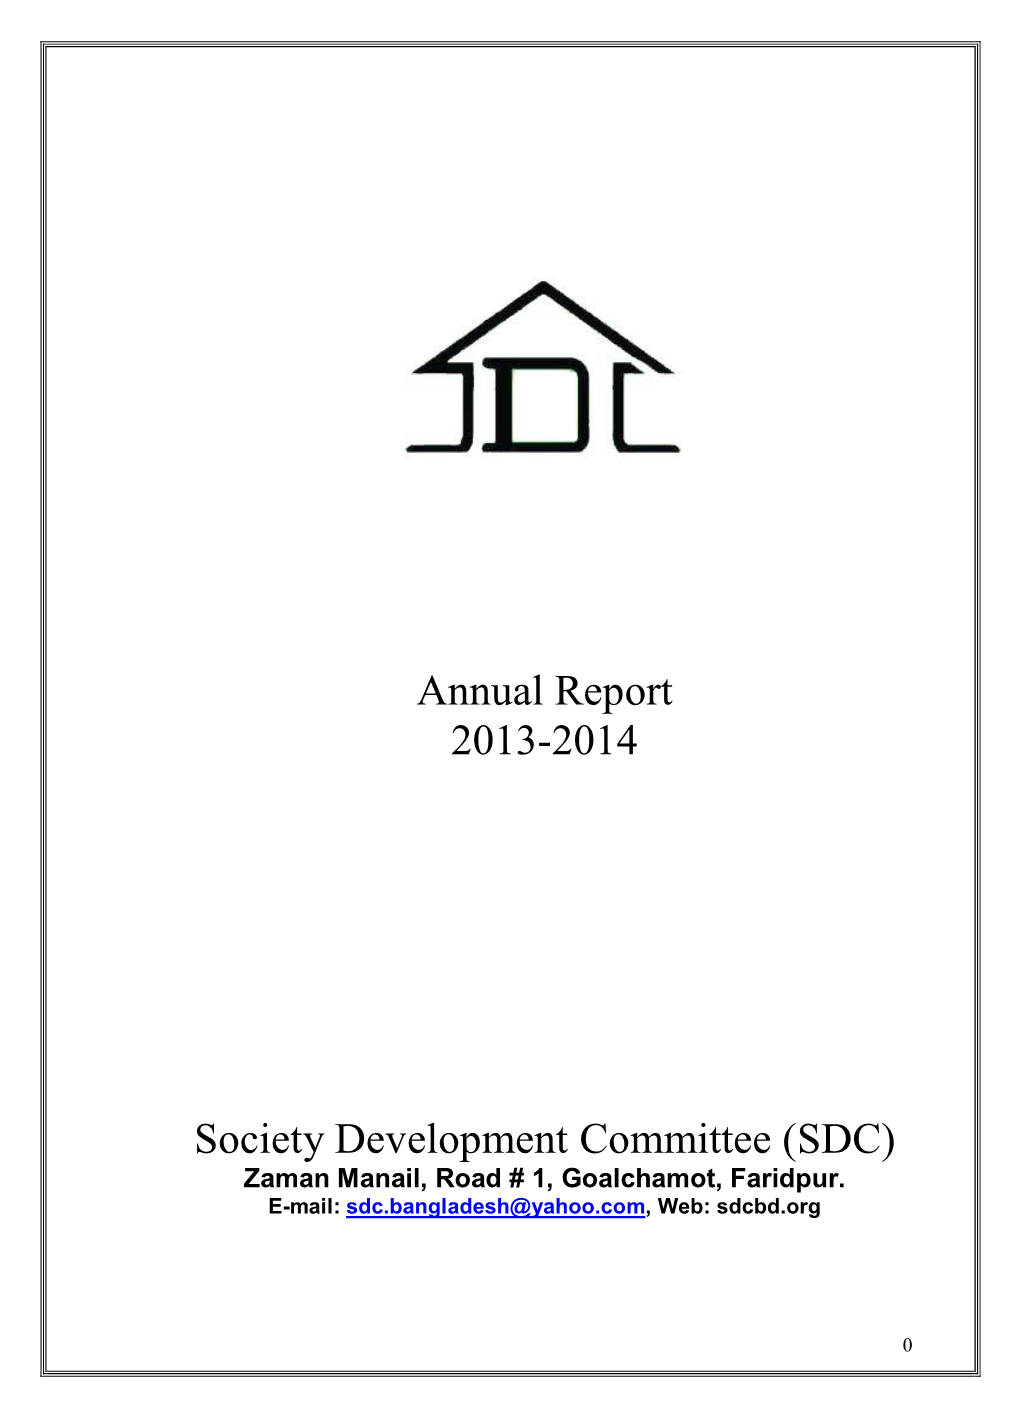 Annual Report 2013-2014 Society Development Committee (SDC)